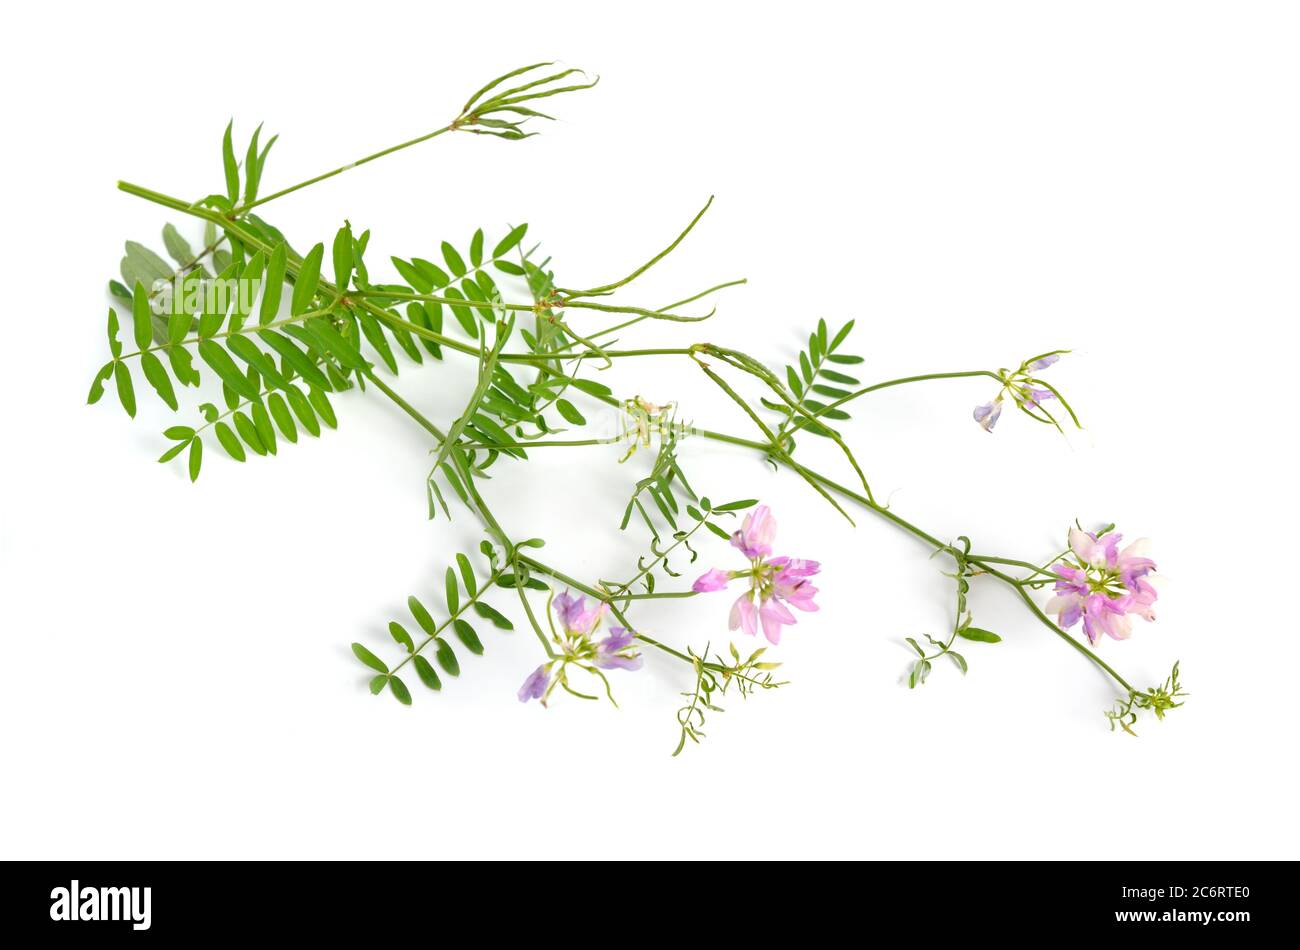 Securigera varia or Coronilla varia, commonly known as crownvetch or purple crown vetch. Isolated on white background Stock Photo